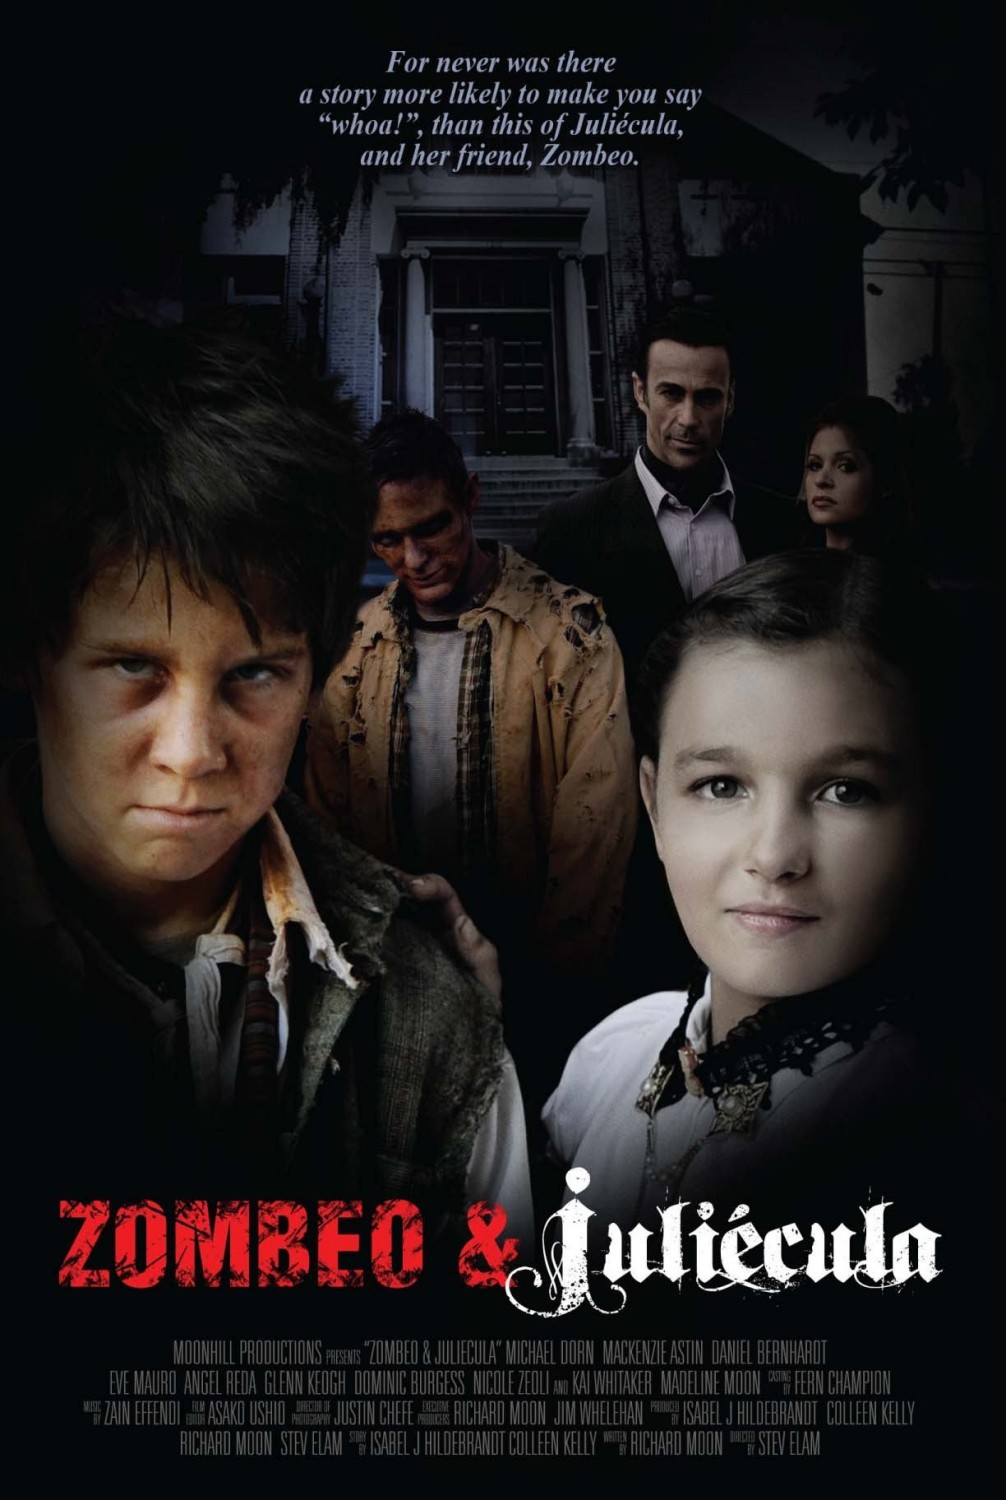 Extra Large Movie Poster Image for Zombeo & Julicula